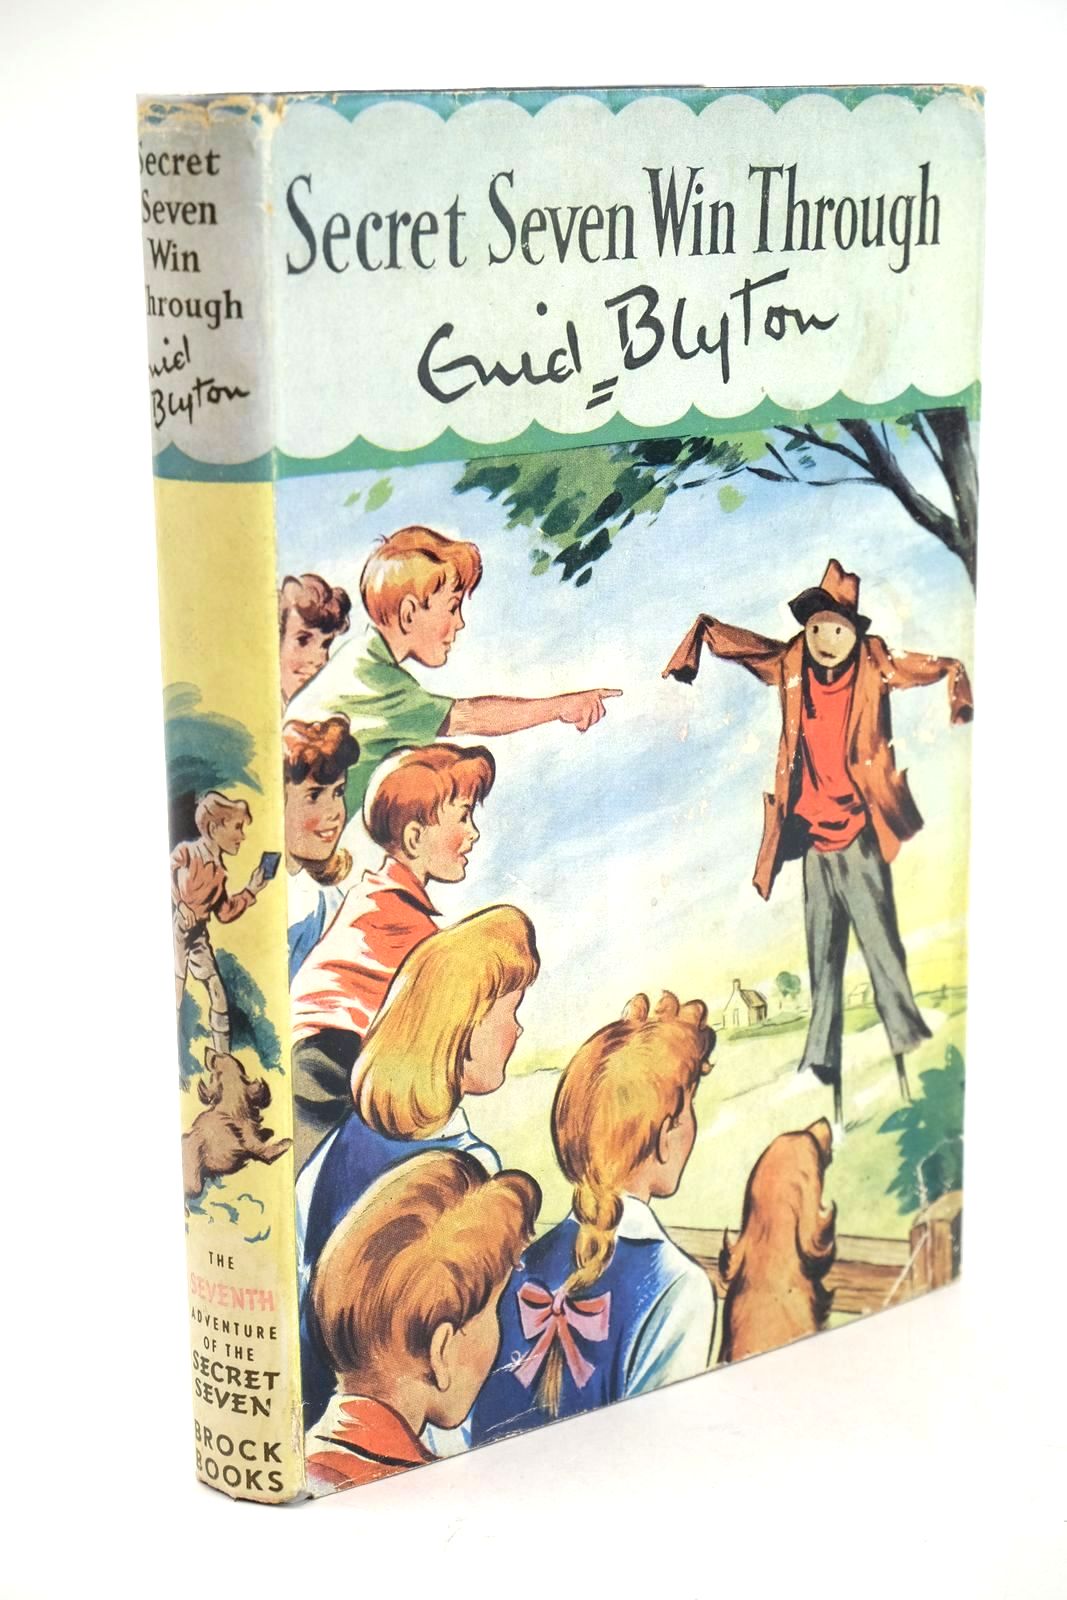 Photo of SECRET SEVEN WIN THROUGH written by Blyton, Enid illustrated by Kay, Bruno published by Brockhampton Press Ltd. (STOCK CODE: 1324545)  for sale by Stella & Rose's Books